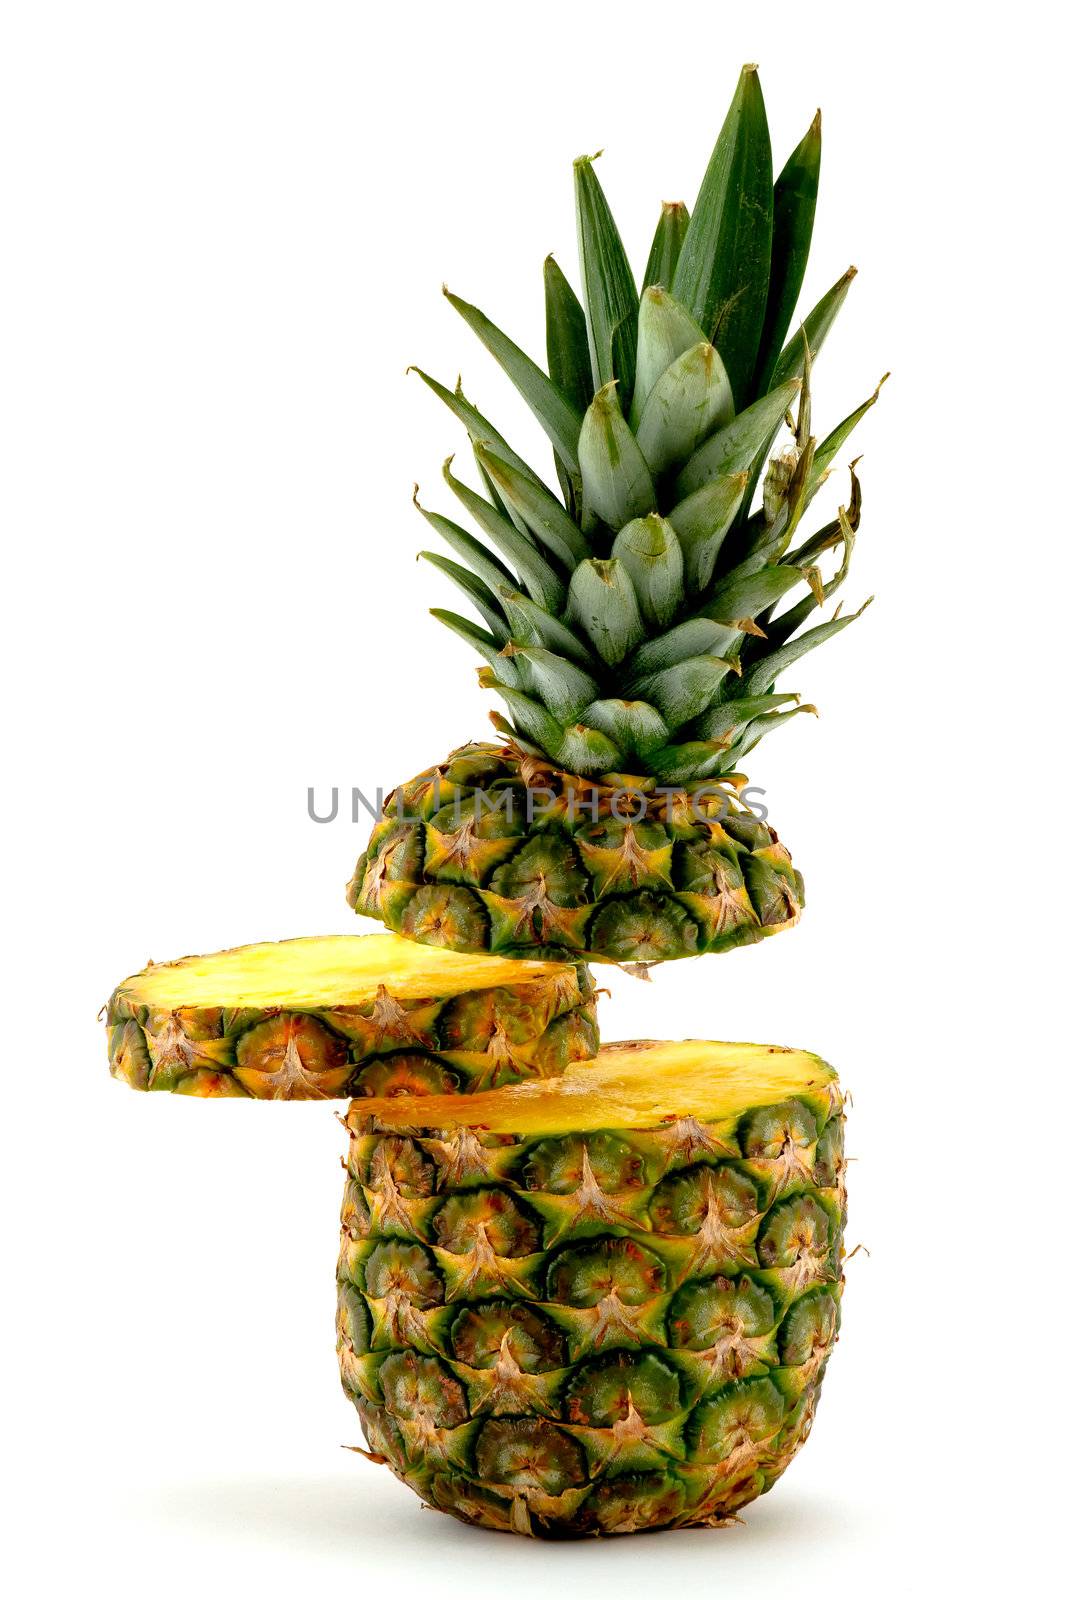 Pineapple and slice on white background by lavsen